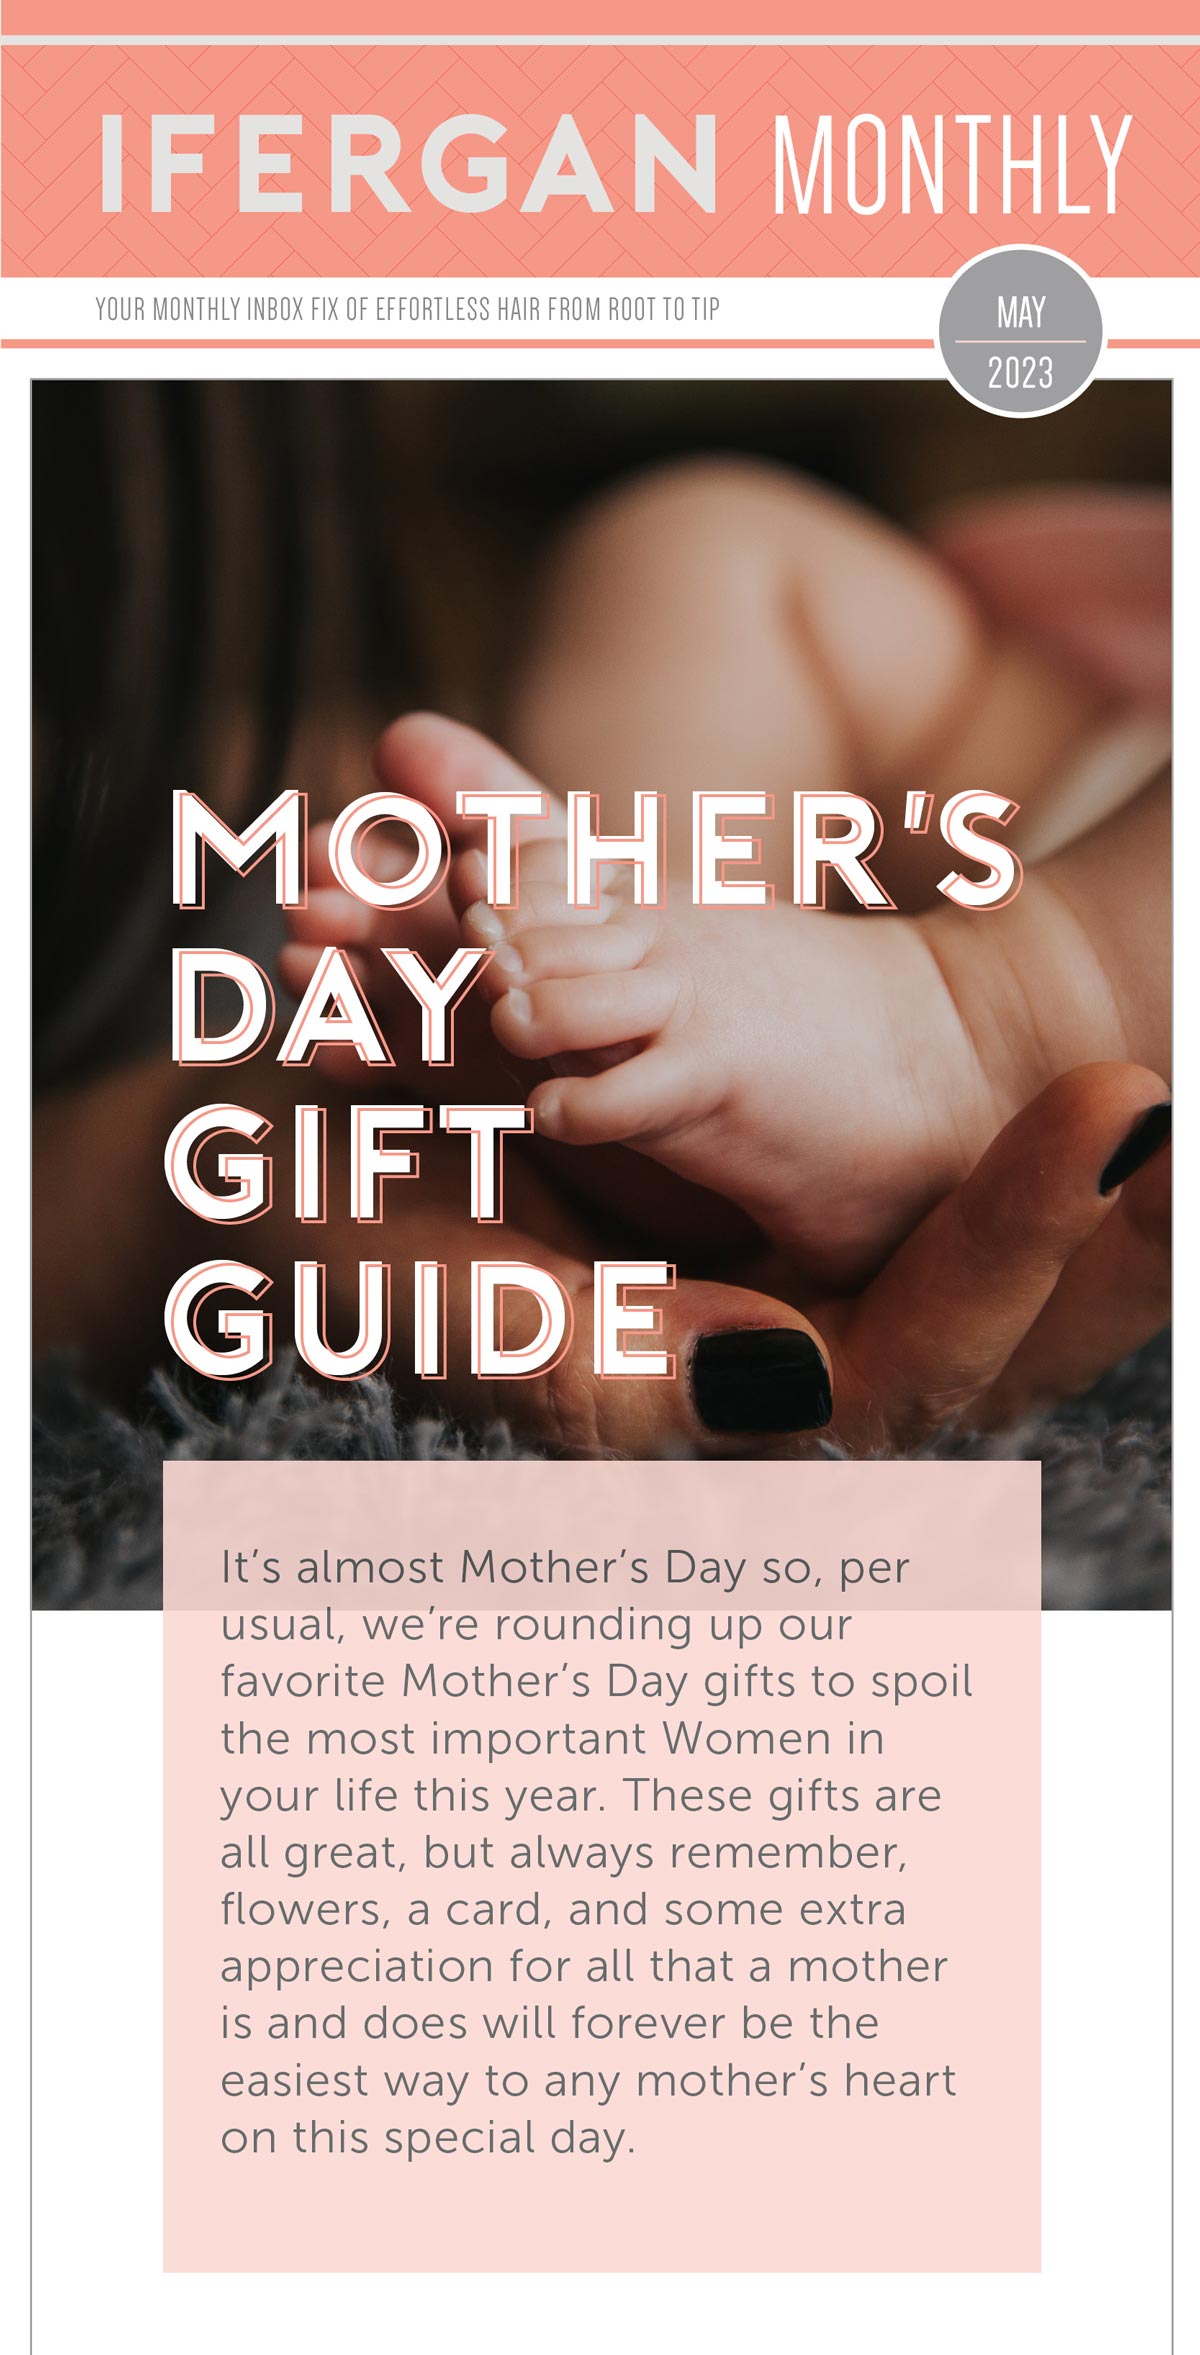 Mother's Day Gift Guide It’s almost Mother's Day so, per usual, we’re rounding up our favorite Mother's Day gifts to spoil the most important Women in your life this year. These gifts are all great, but always remember, flowers, a card, and some extra appreciation for all that a mother is and does will forever be the easiest way to any mother's heart on this special day. 